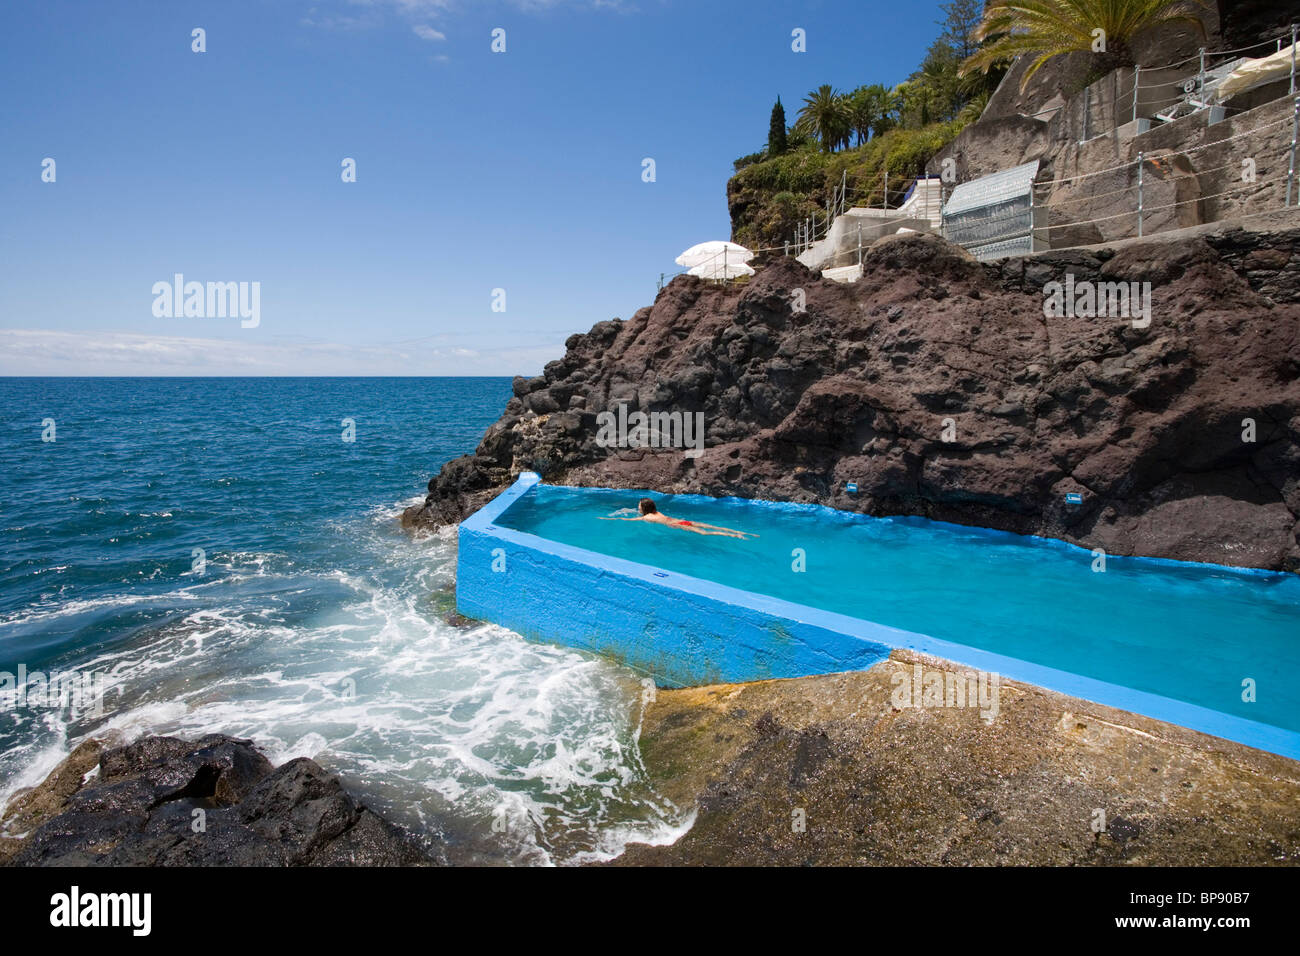 Seawater swimming pool at Reid's Palace Hotel, Funchal, Madeira, Portugal Stock Photo